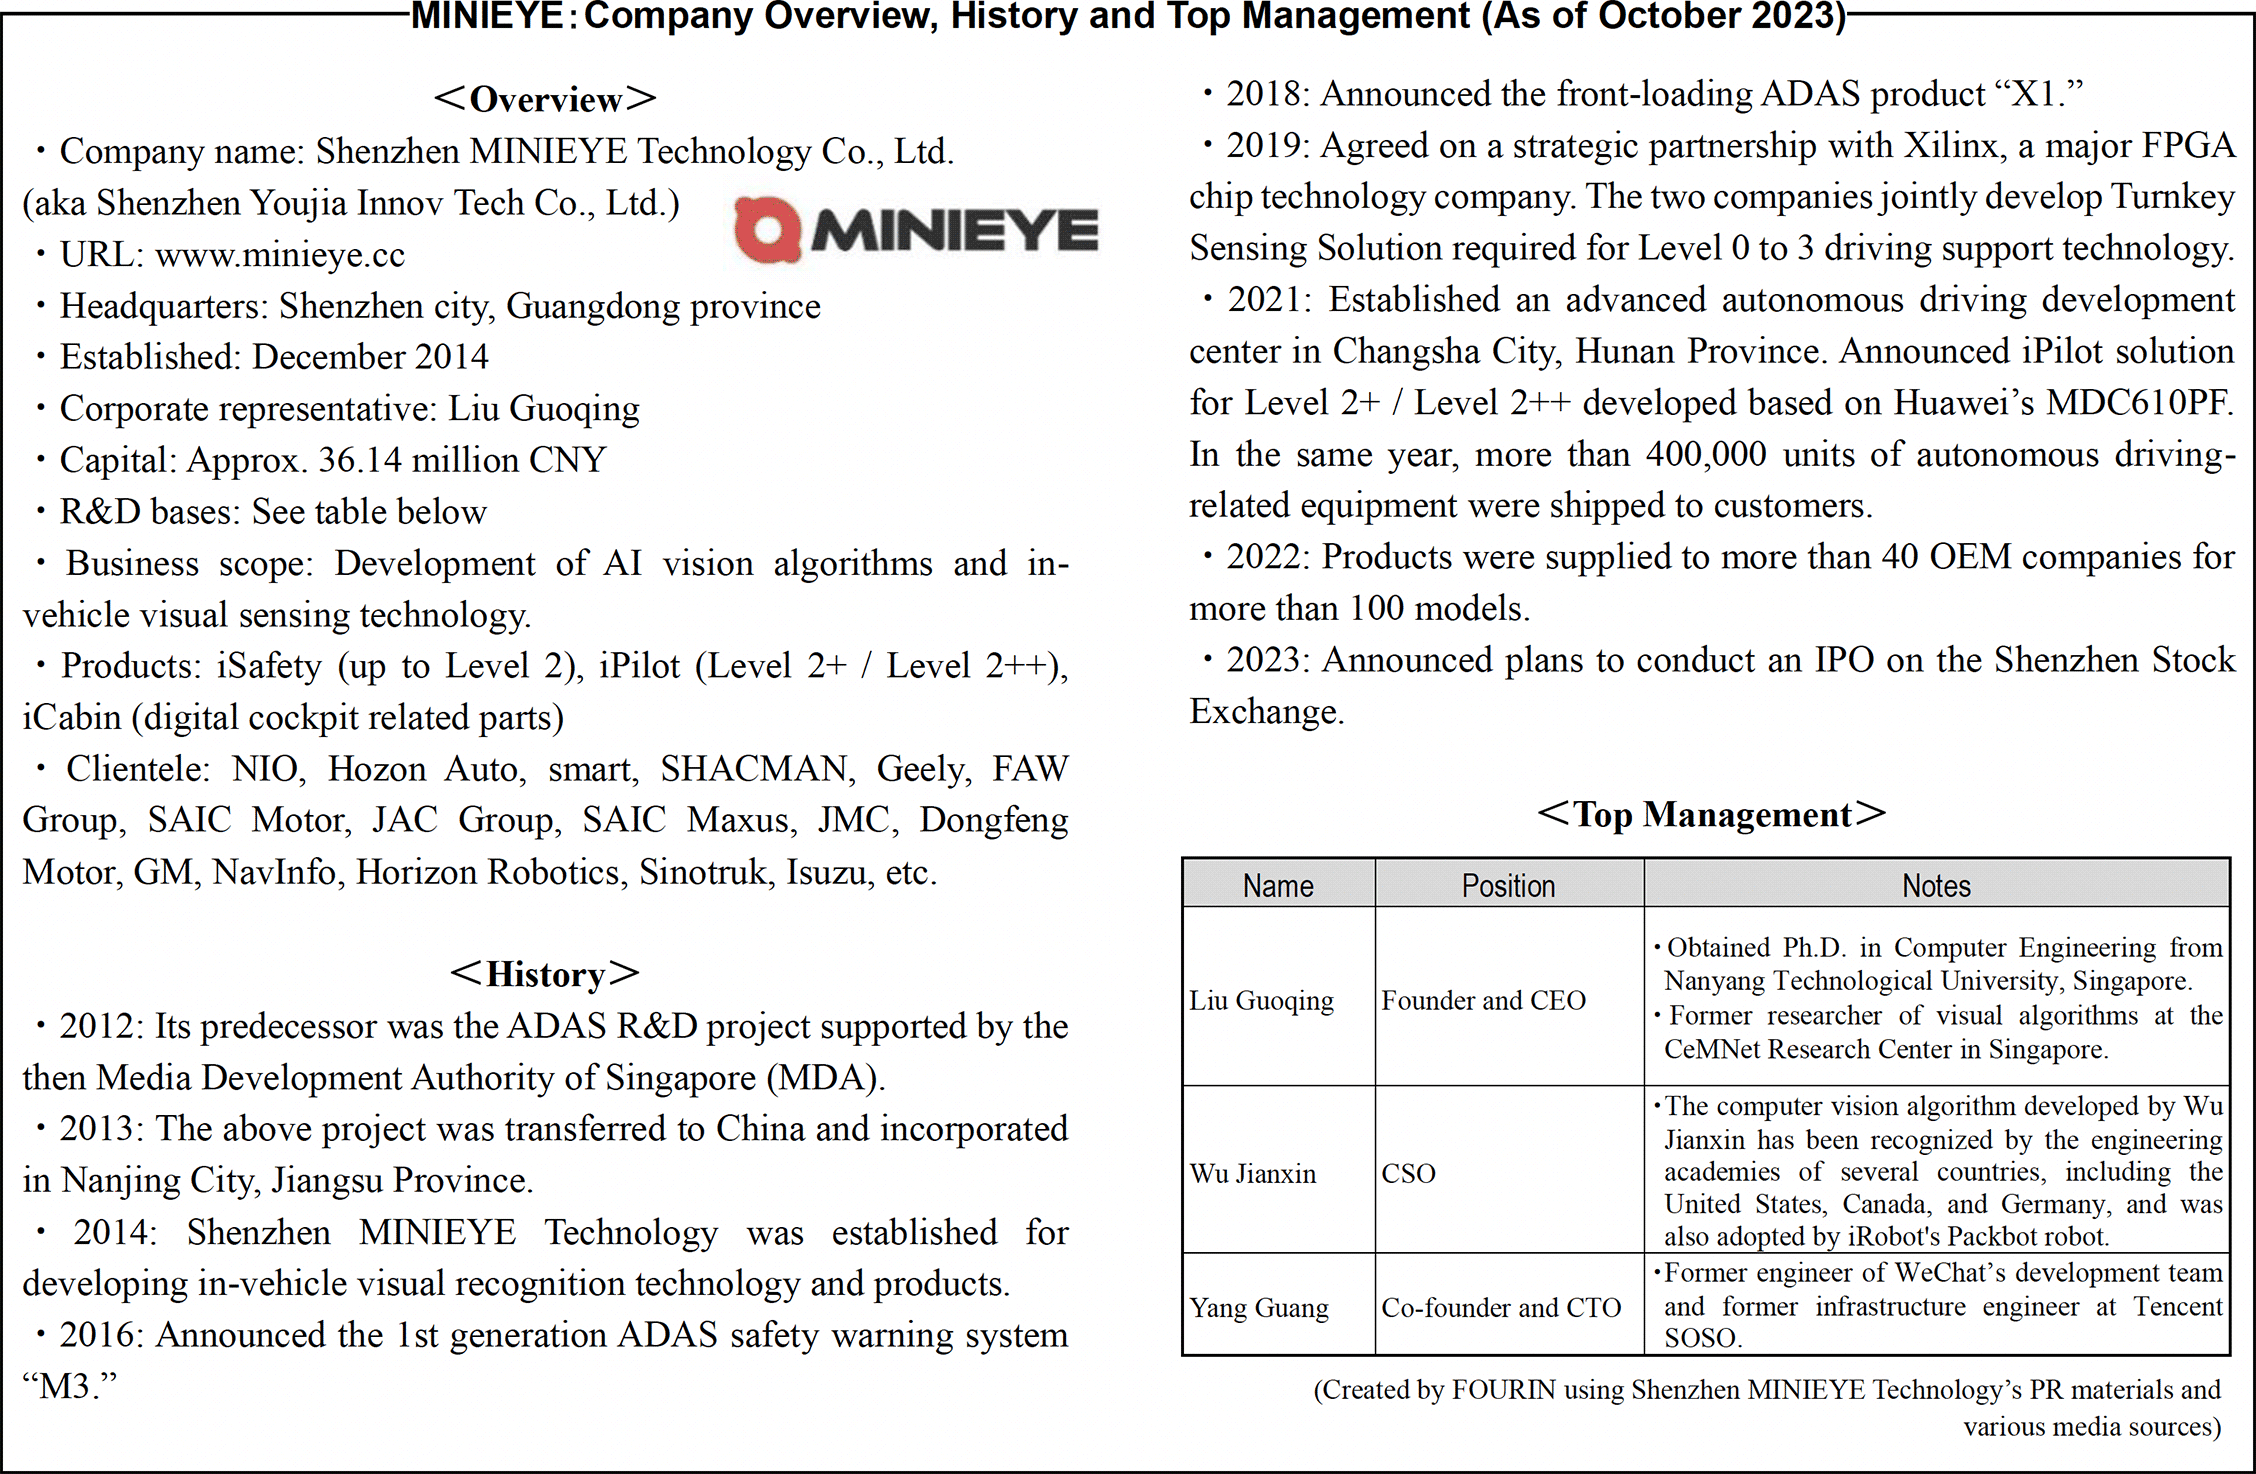 Text: MINIEYE：Company Overview, History and Top Management (As of October 2023)